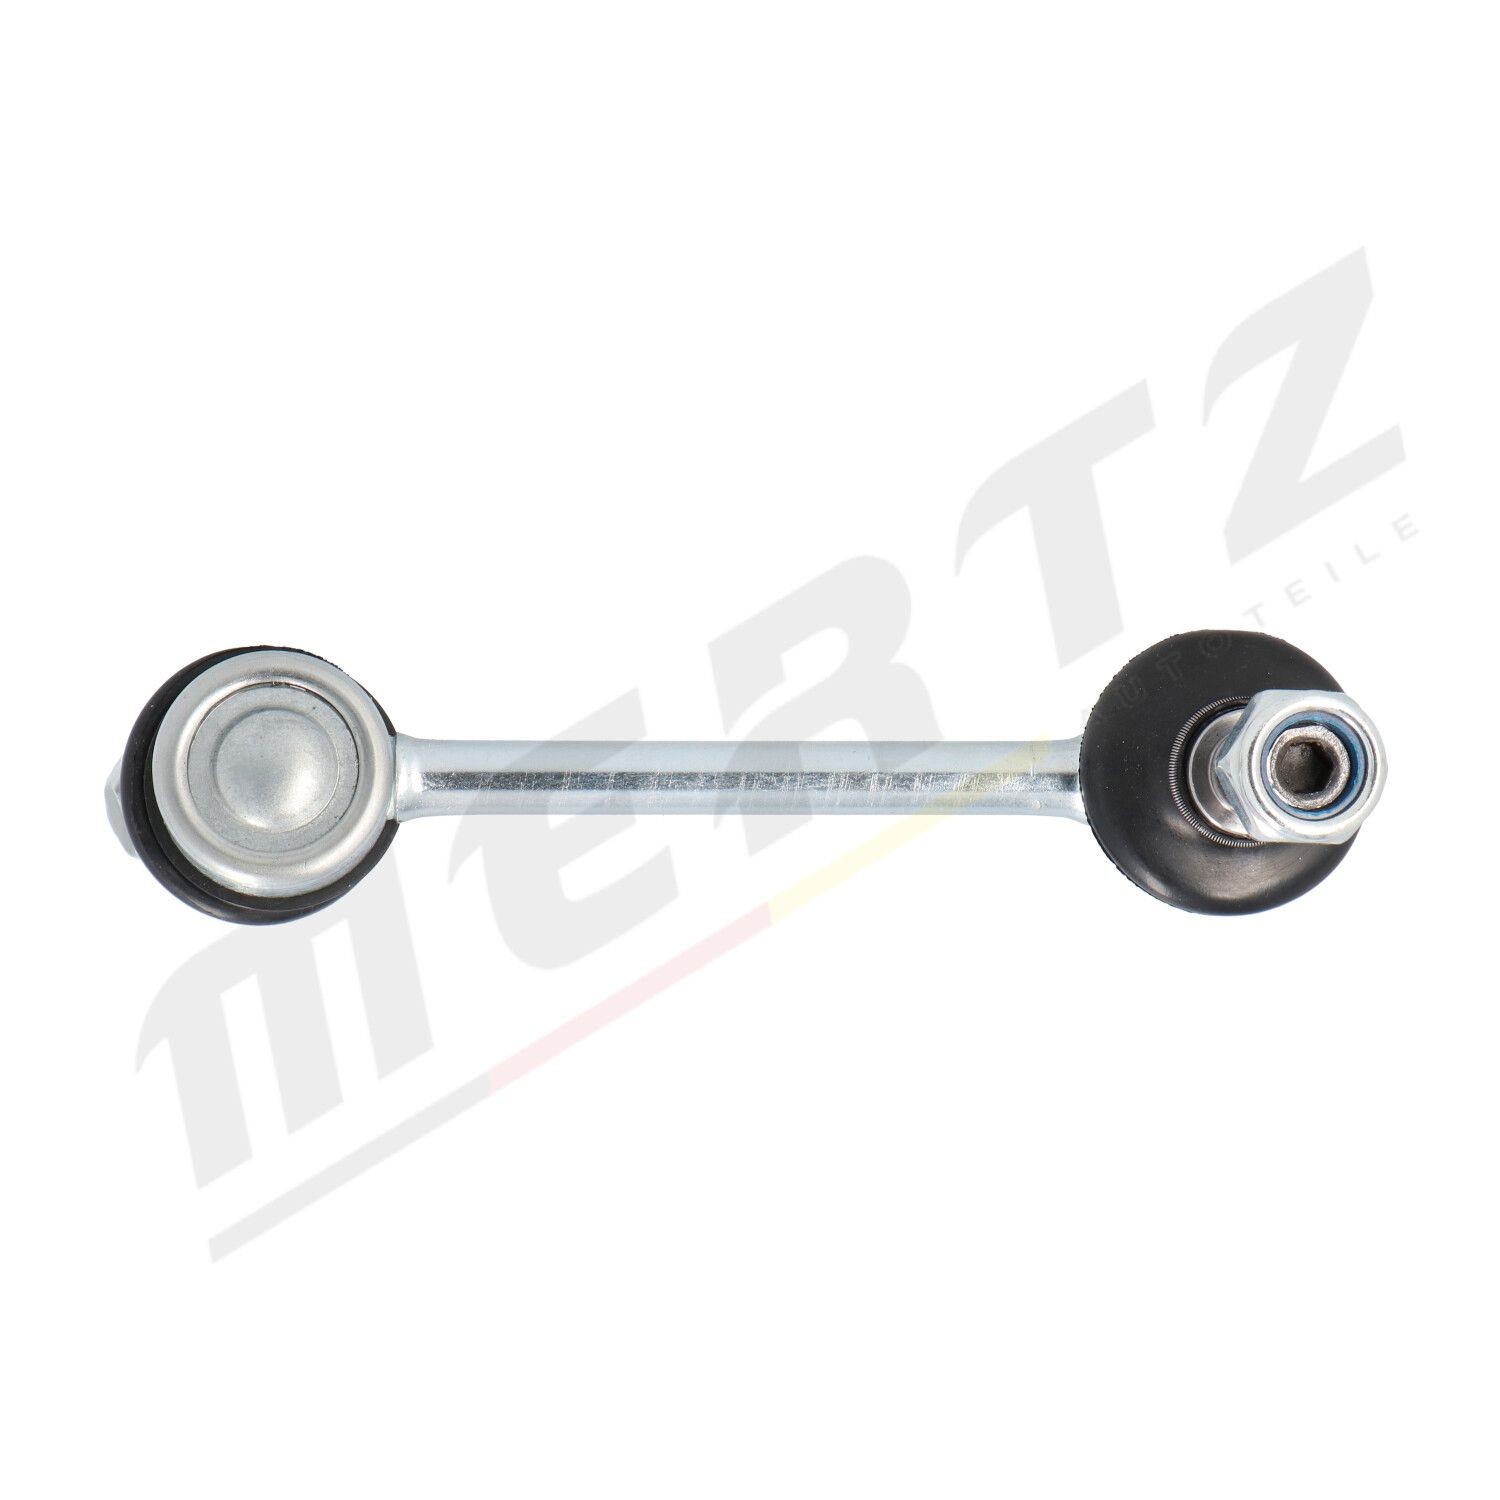 MERTZ M-S1764 Anti-roll bar link Front Axle Left, Front Axle Right, 129mm, M12x1,25 , with nut, Steel